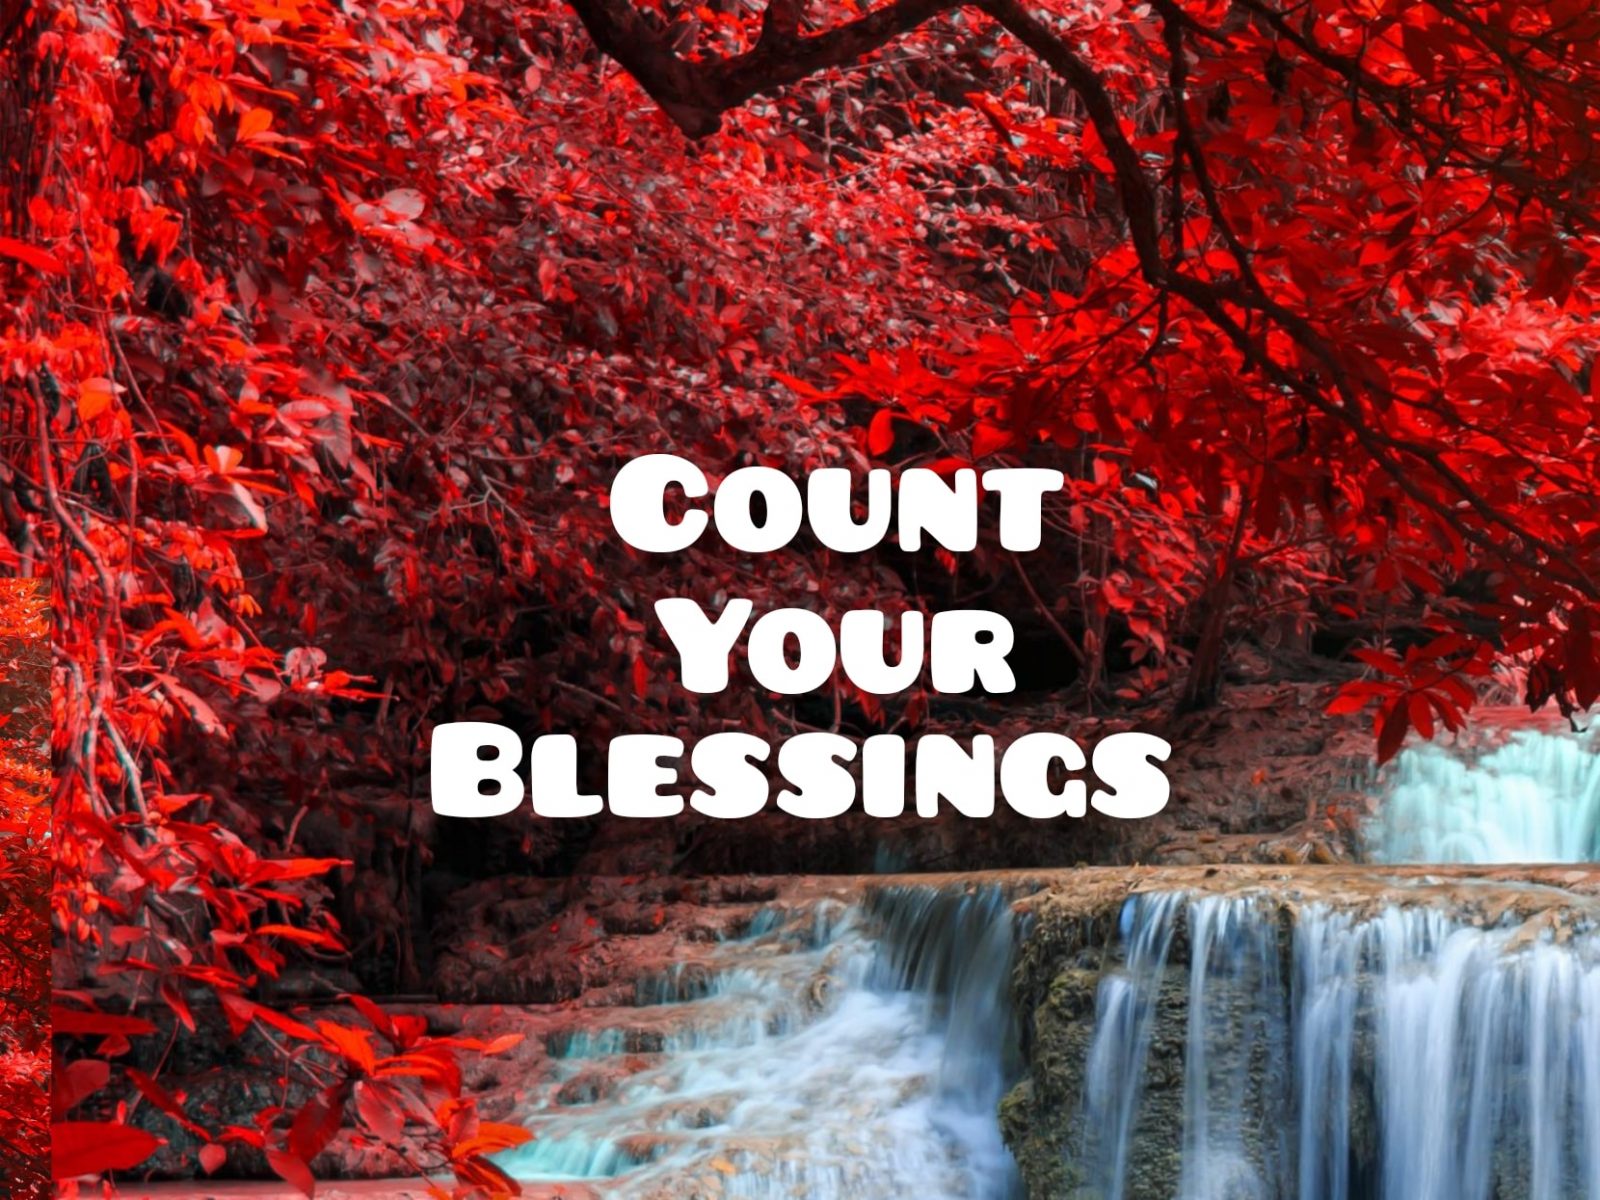 One of the ingredients of a recipe for happiness is to count the blessings.